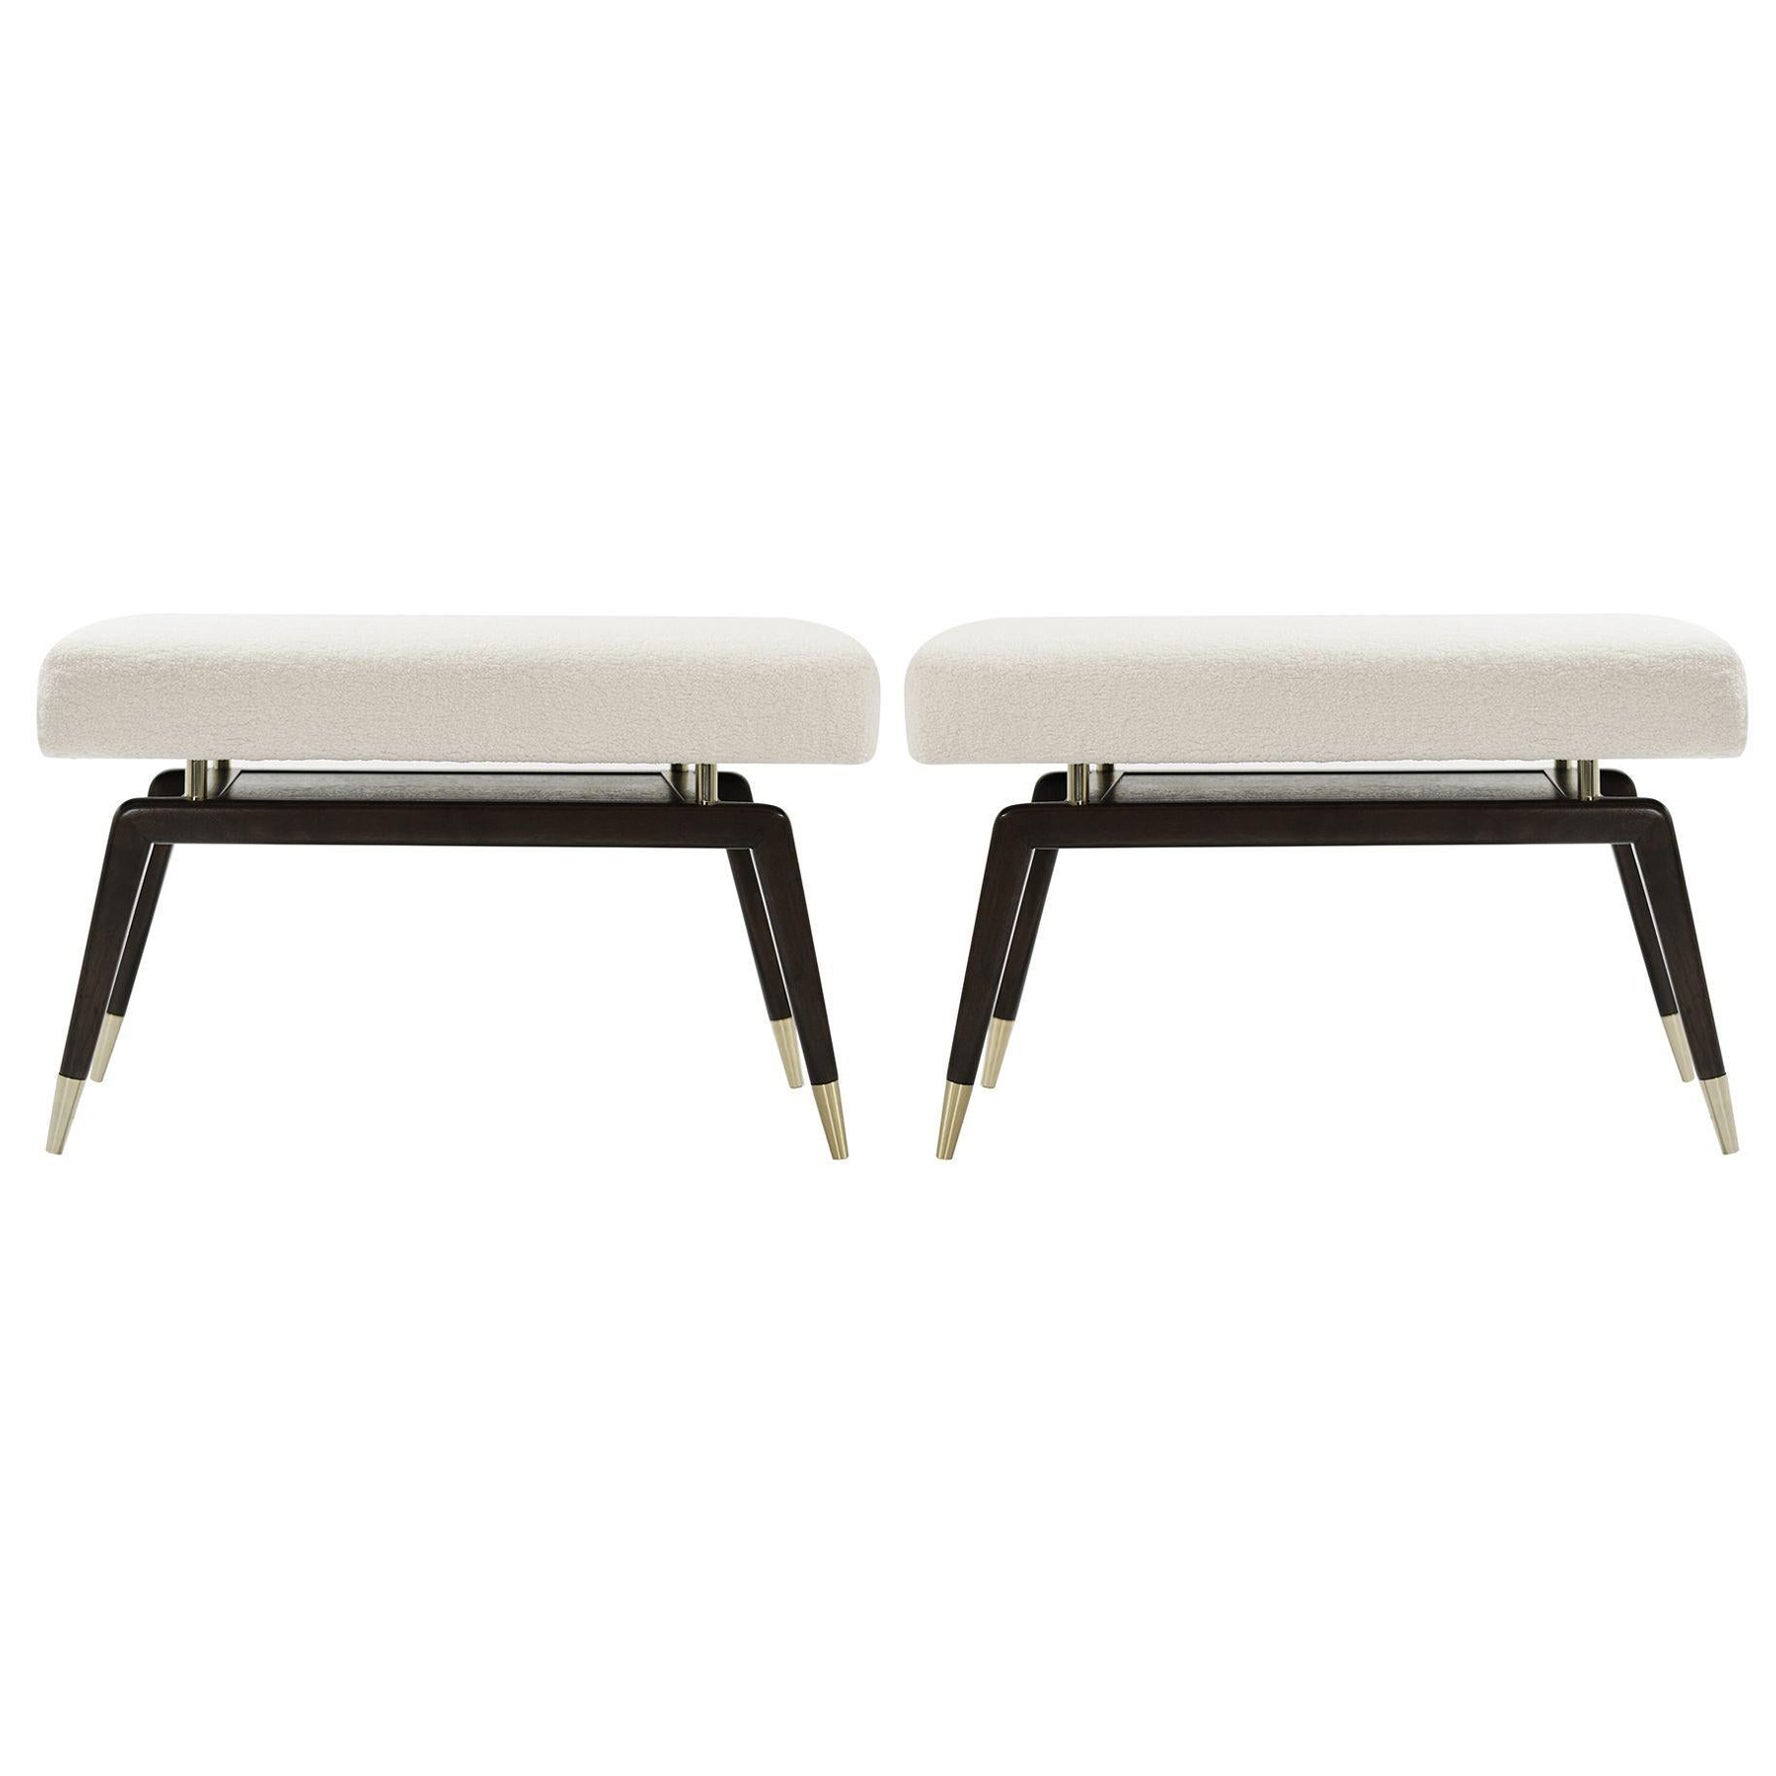 Set of Gio Benches by Stamford Modern